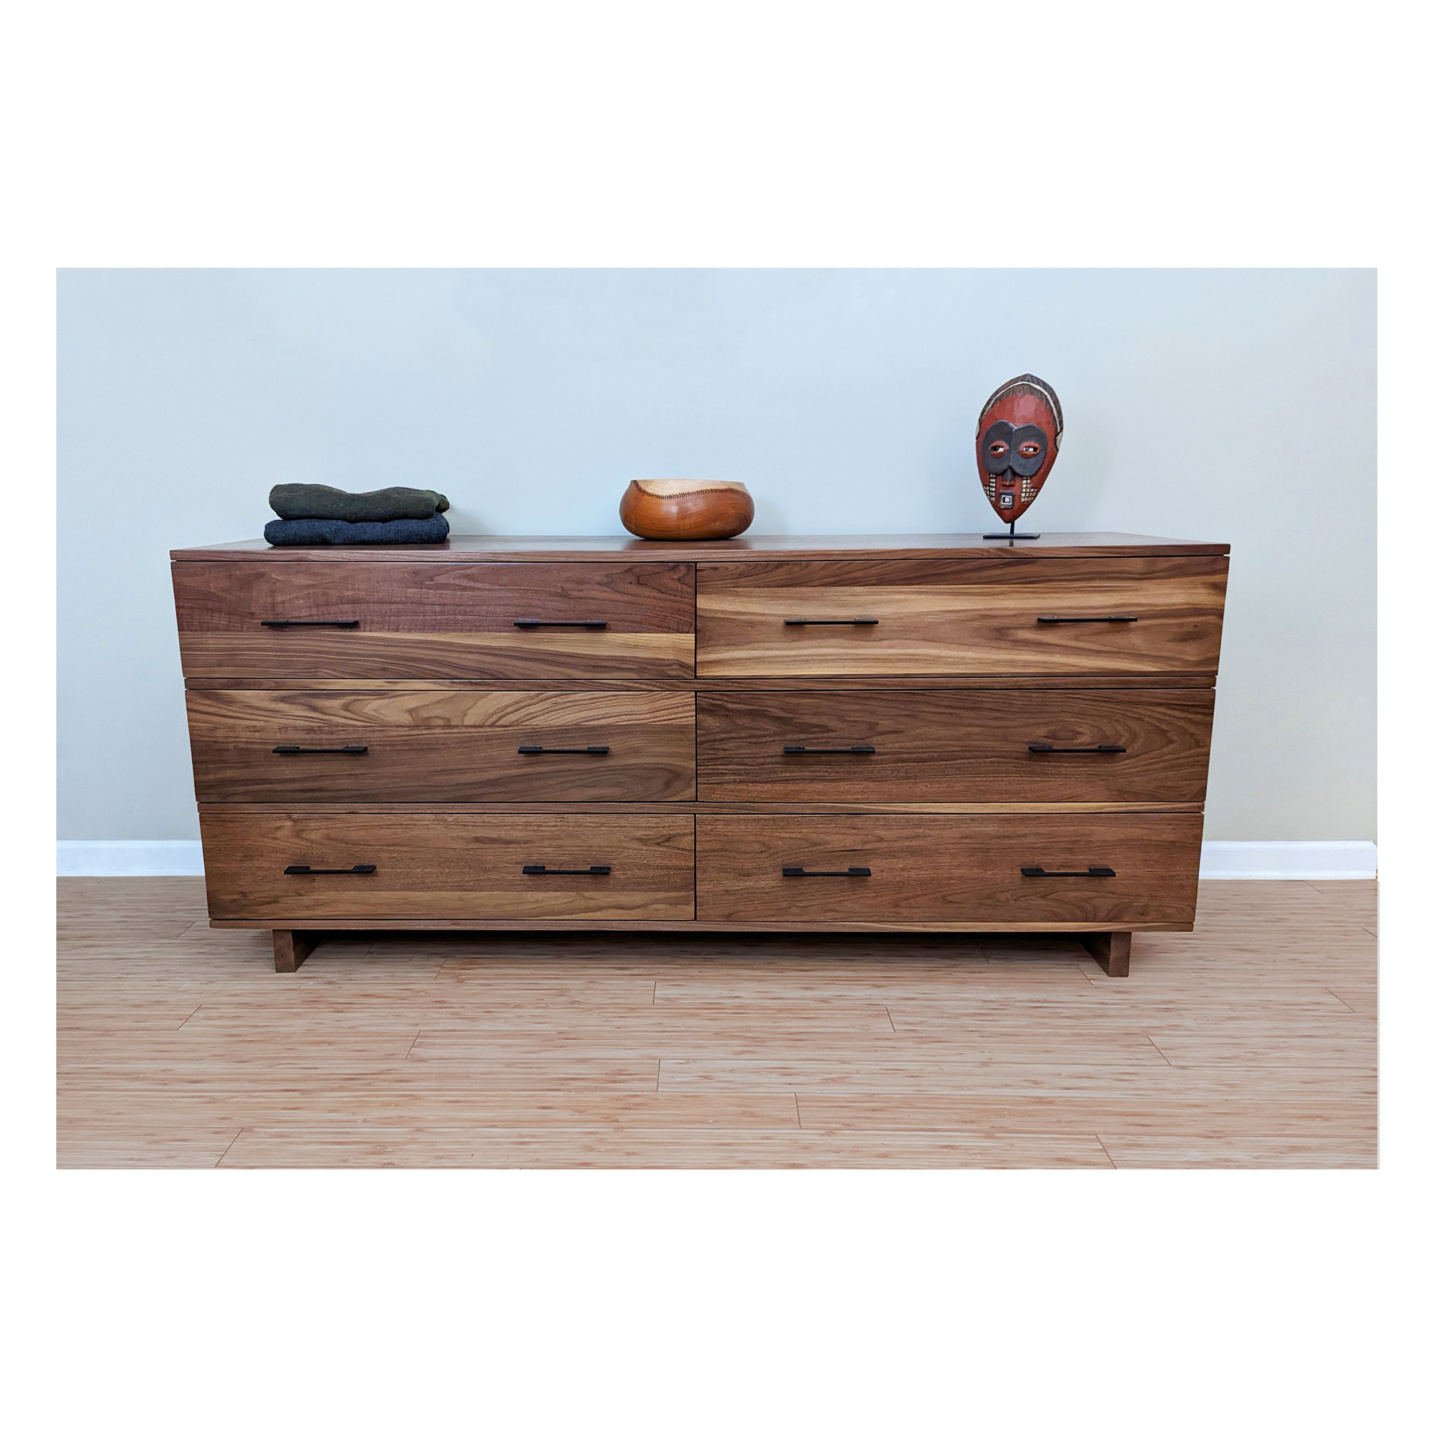 Walnut Modern Dresser 5 feet long with six drawers--Solid Walnut Construction--Made by 57NorthPlank Tailored Modern Furniture